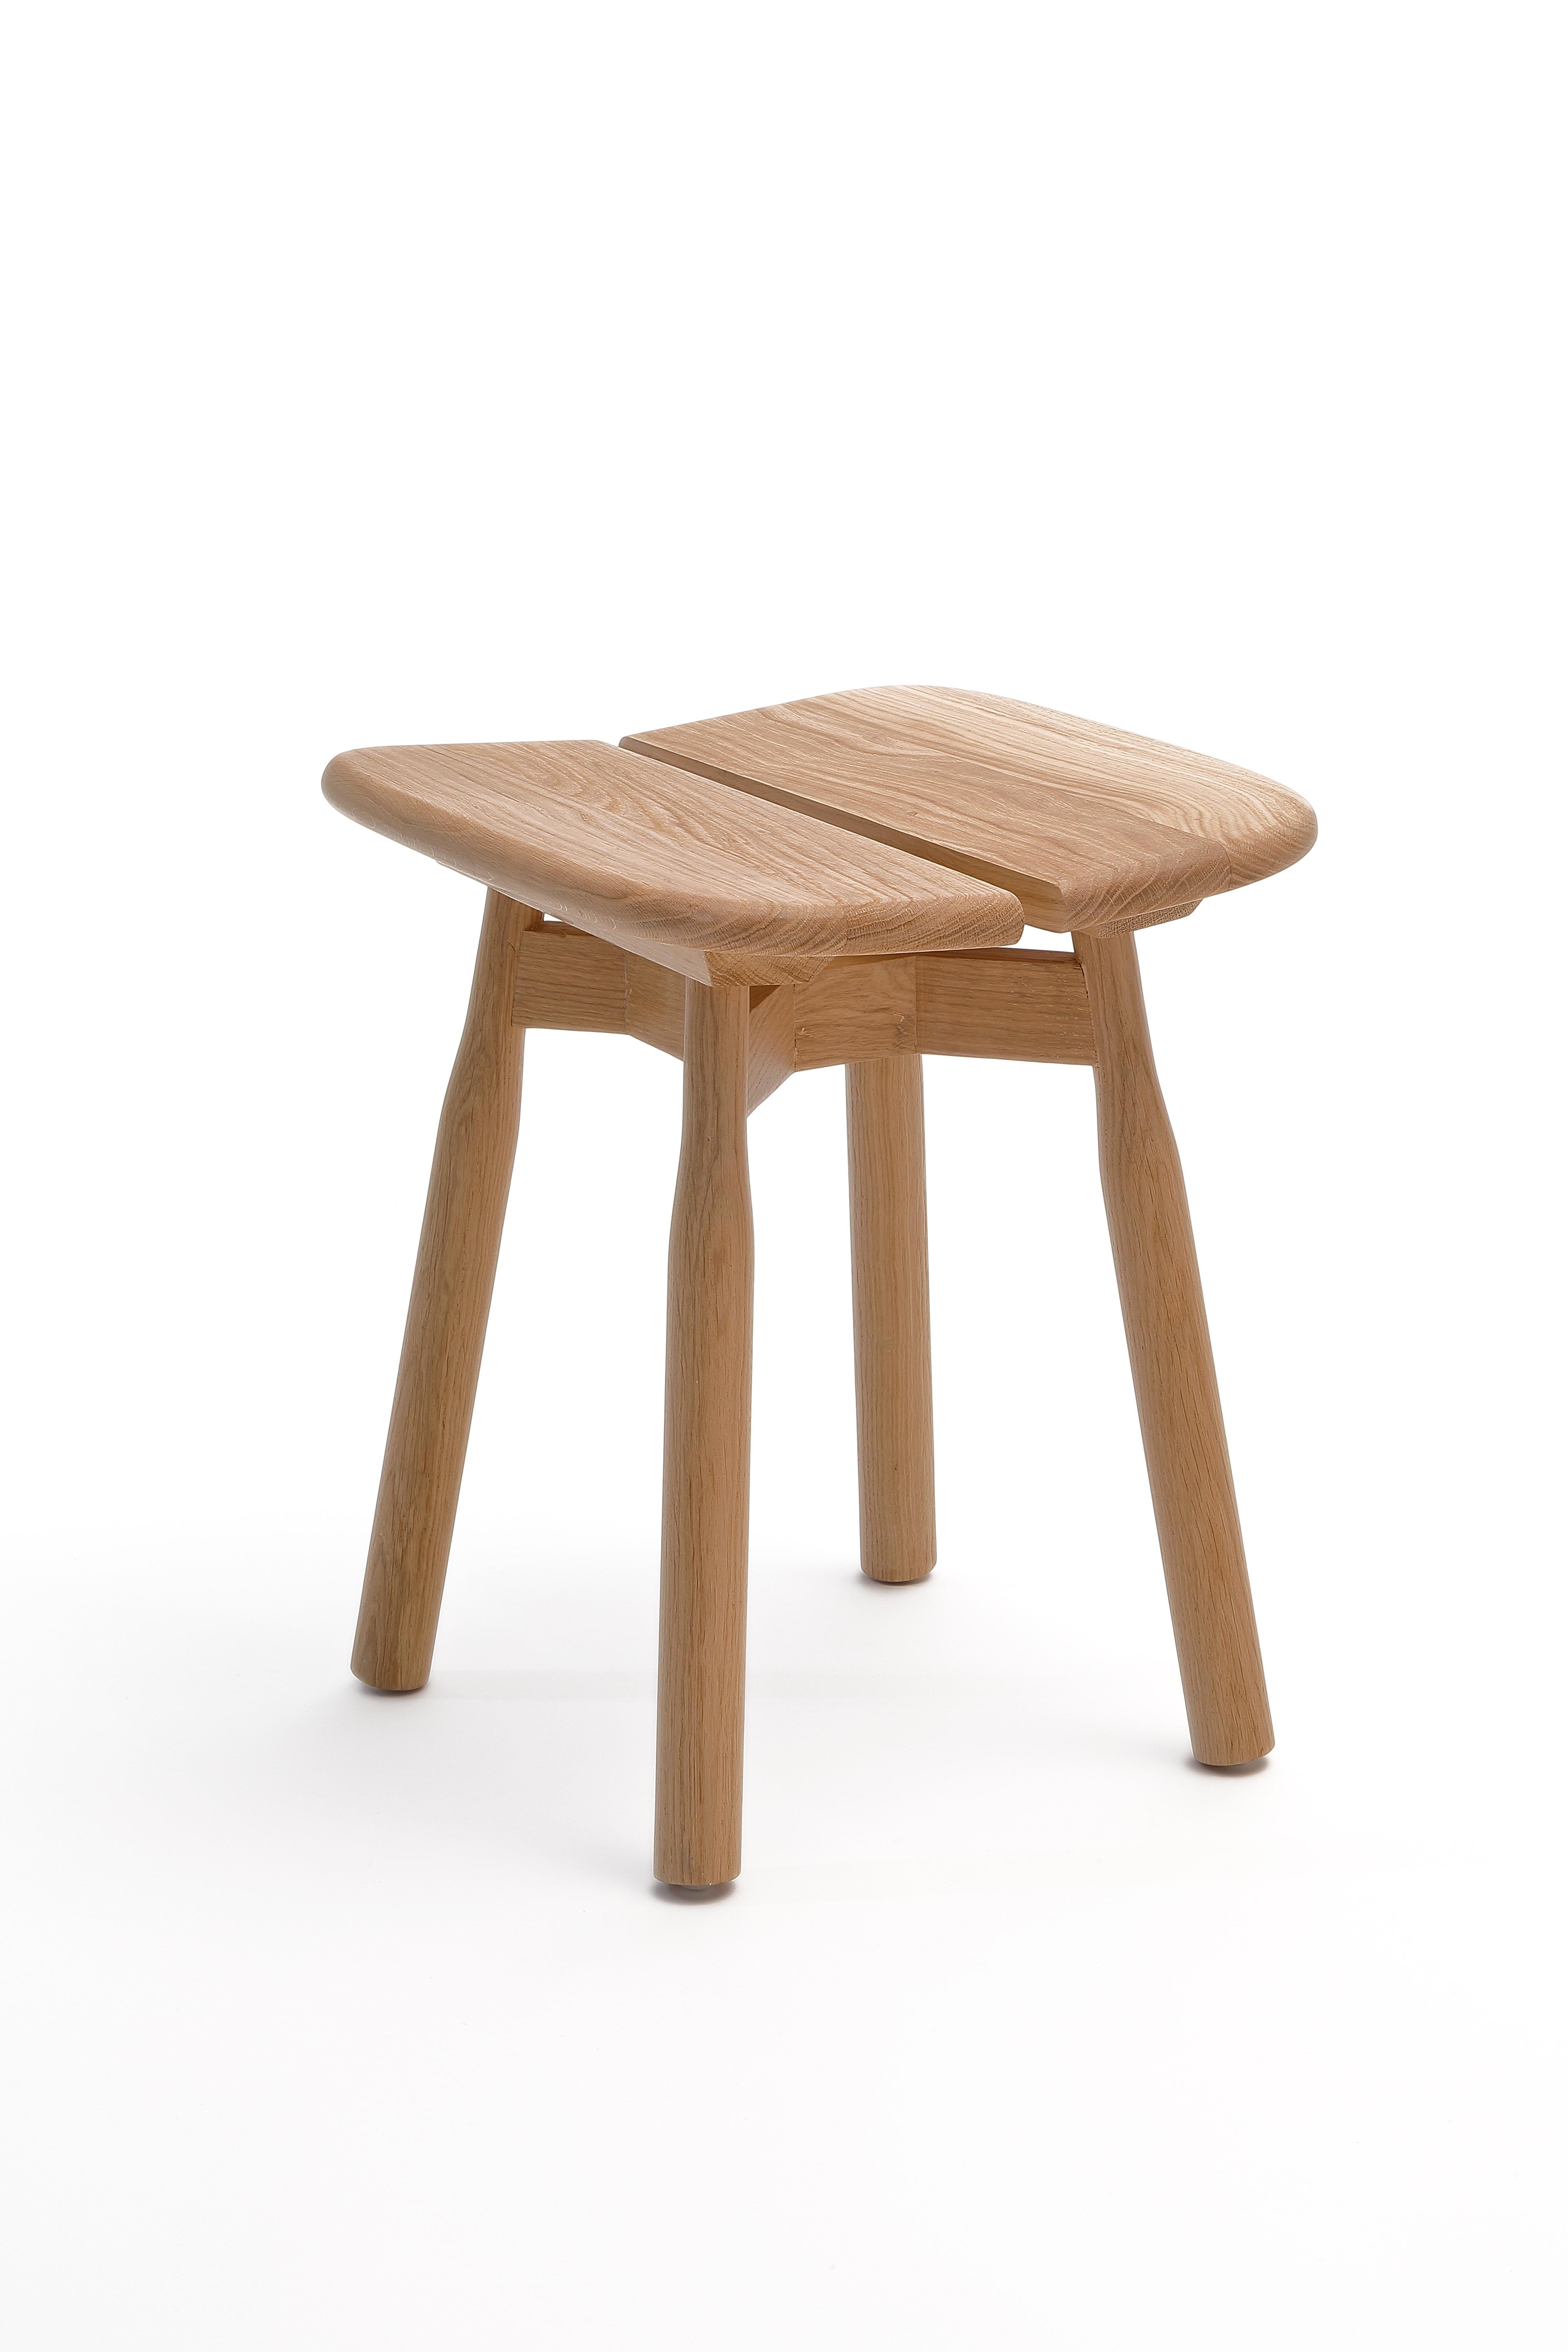 Natural oak DOM stool by Marcos Zanuso Jr
Materials: Low stool, structure, and seat in solid oak, natural varnished or black stained.
Technique: Lacquered metal. Natural or stained wood. 
Dimensions: D 38 x W 40 x H 46 cm


Marco Zanuso JR, the